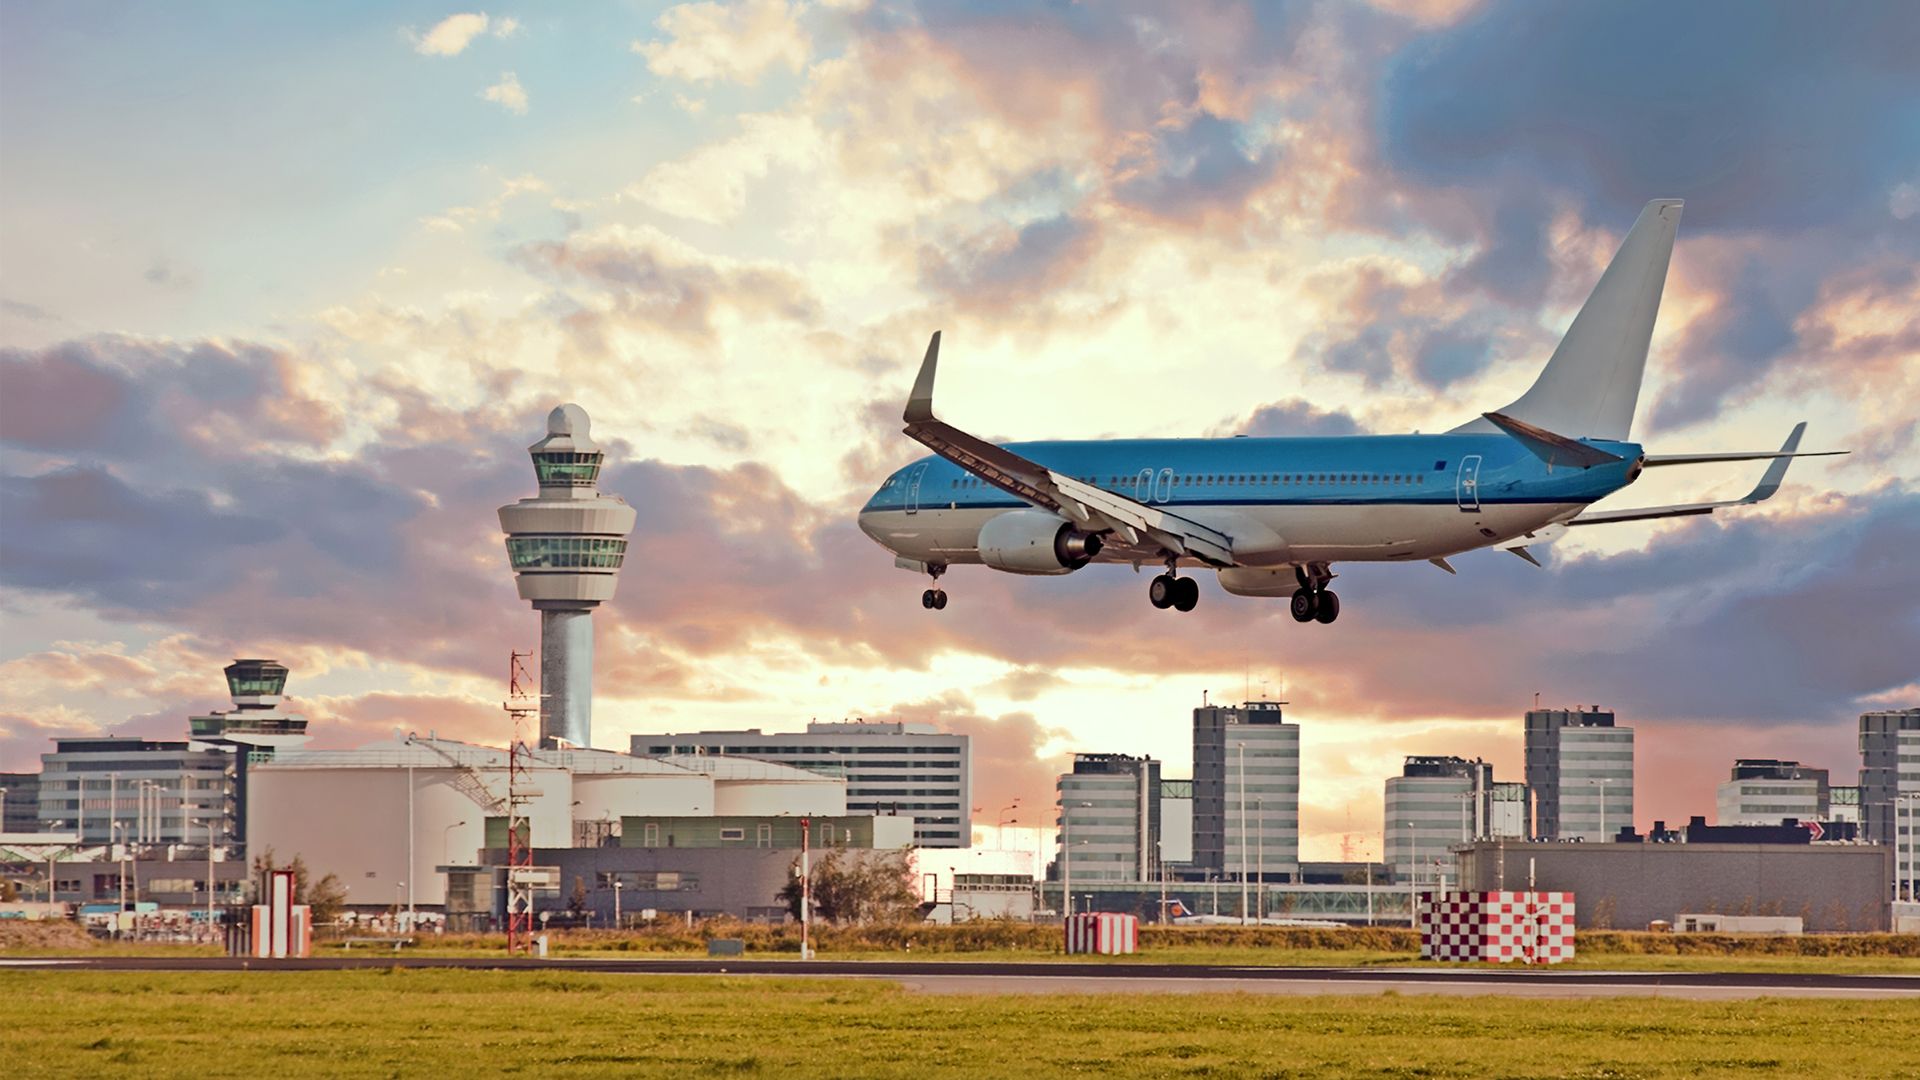 A plane lands at Schiphol Airport, Amsterdam